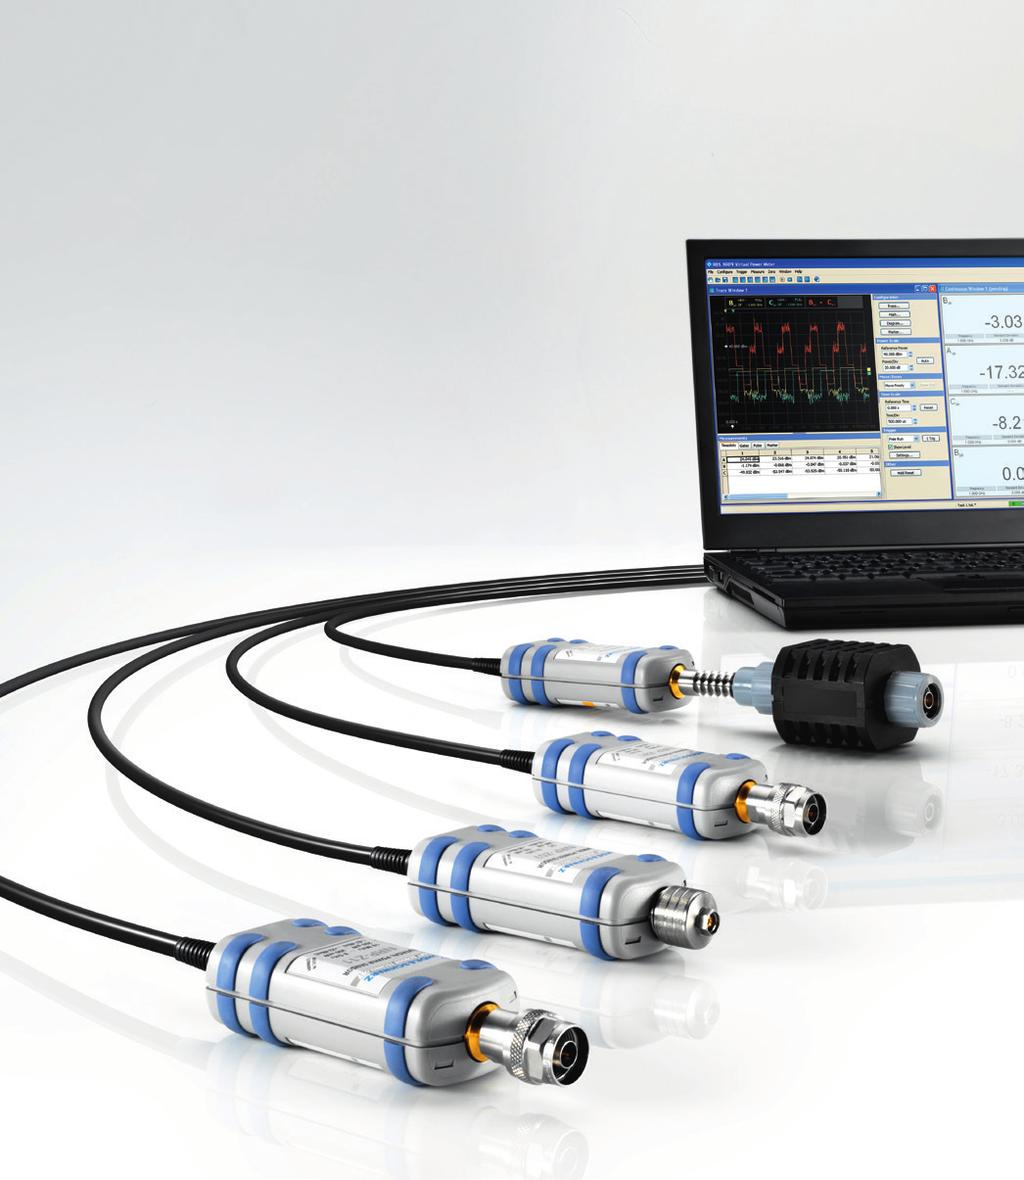 High quality and reliability Examples of R&S NRP power sensors.